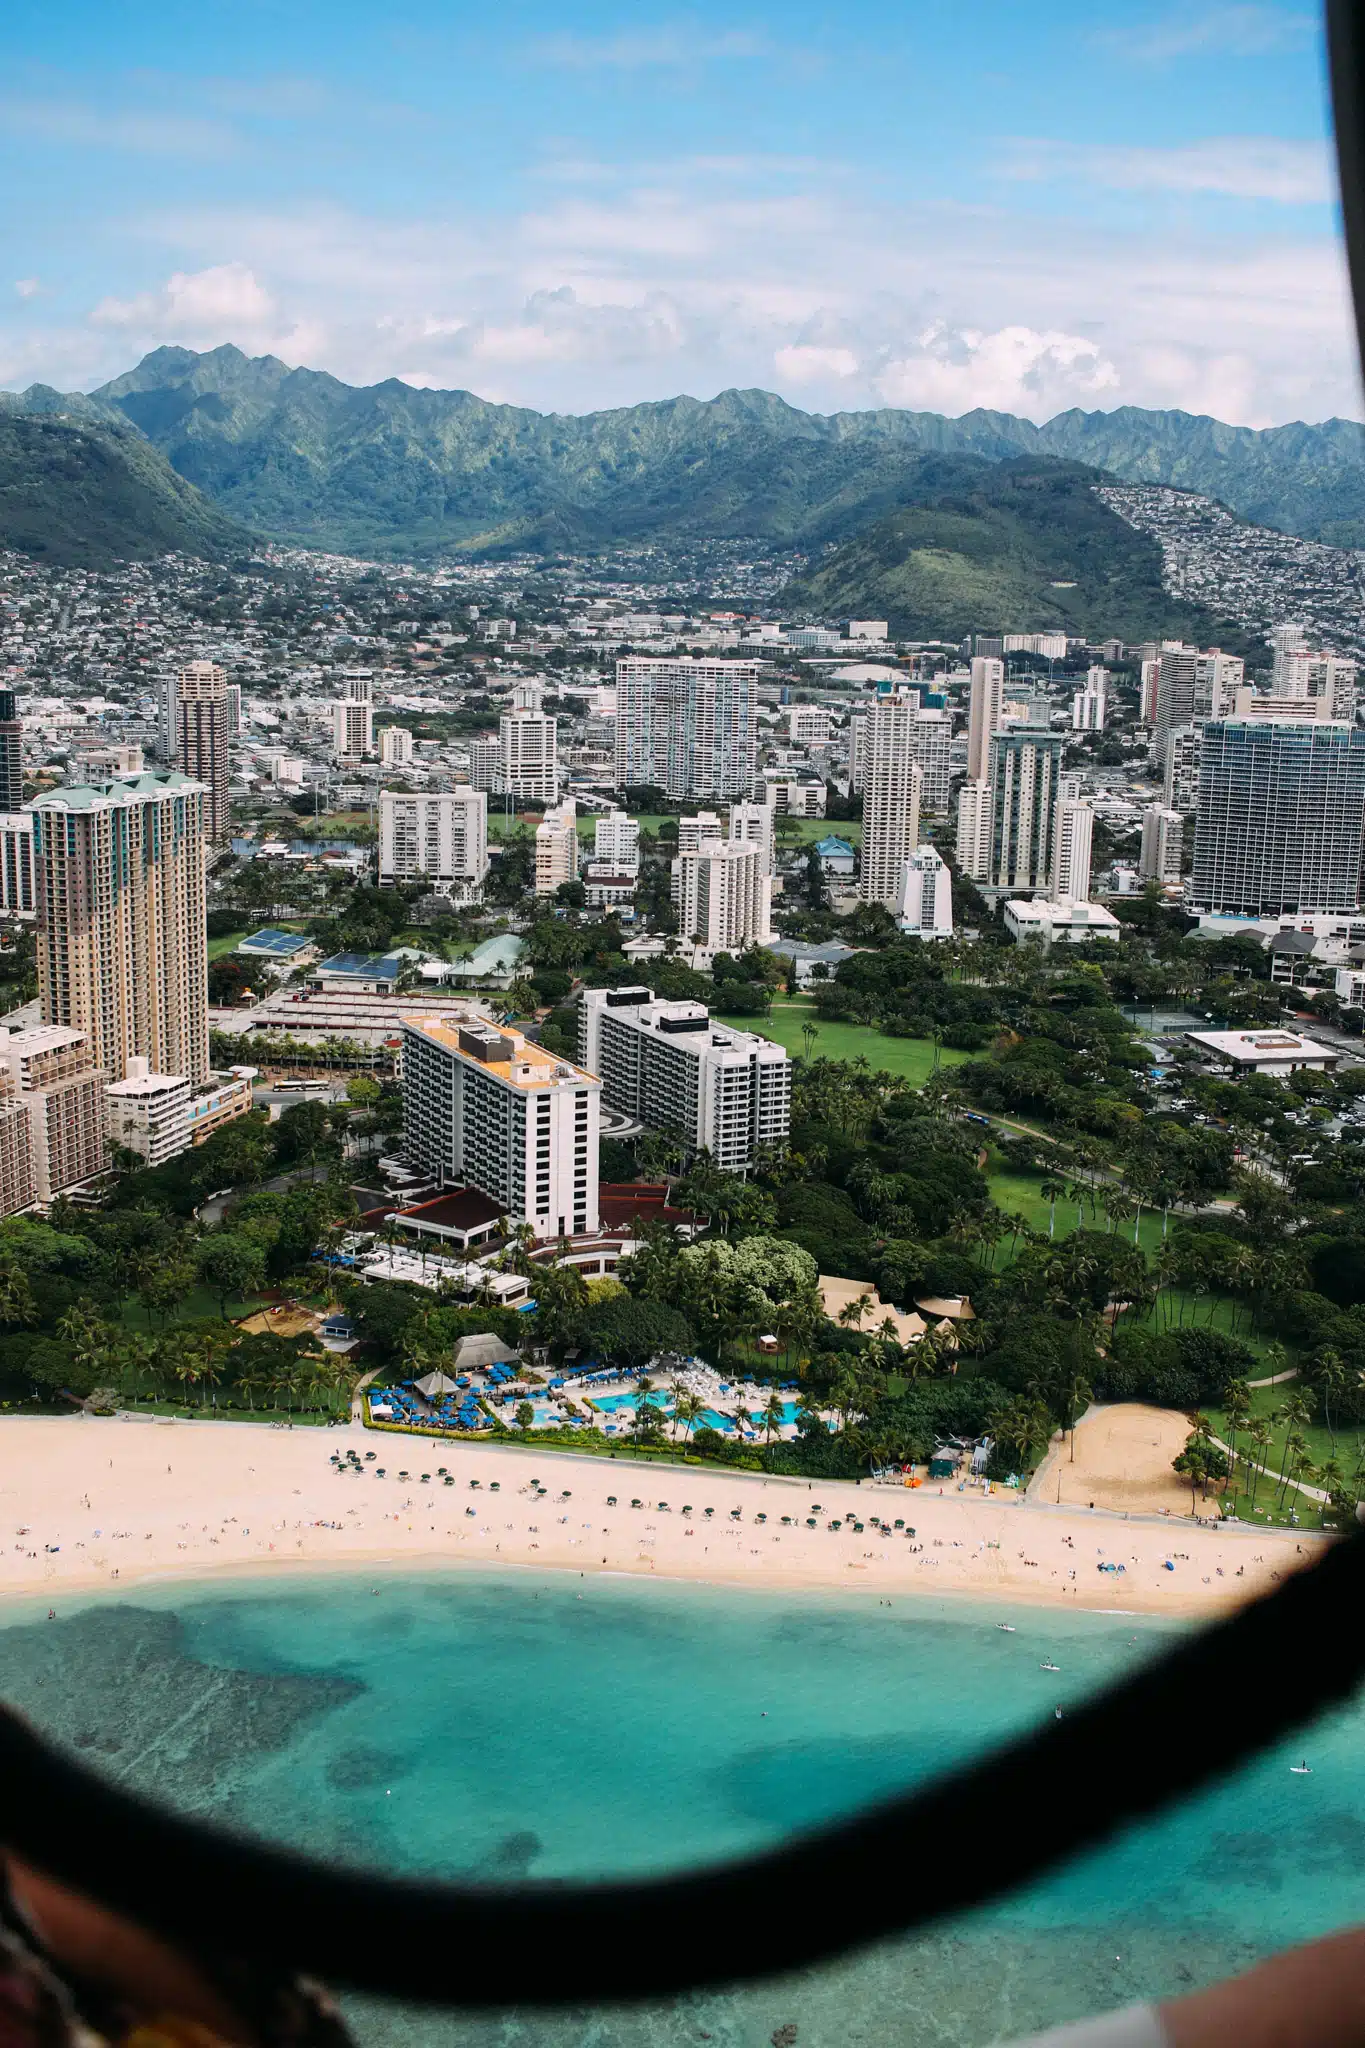 The Impact of Tourism on Hawaii: The Balance of Economy and Ecology